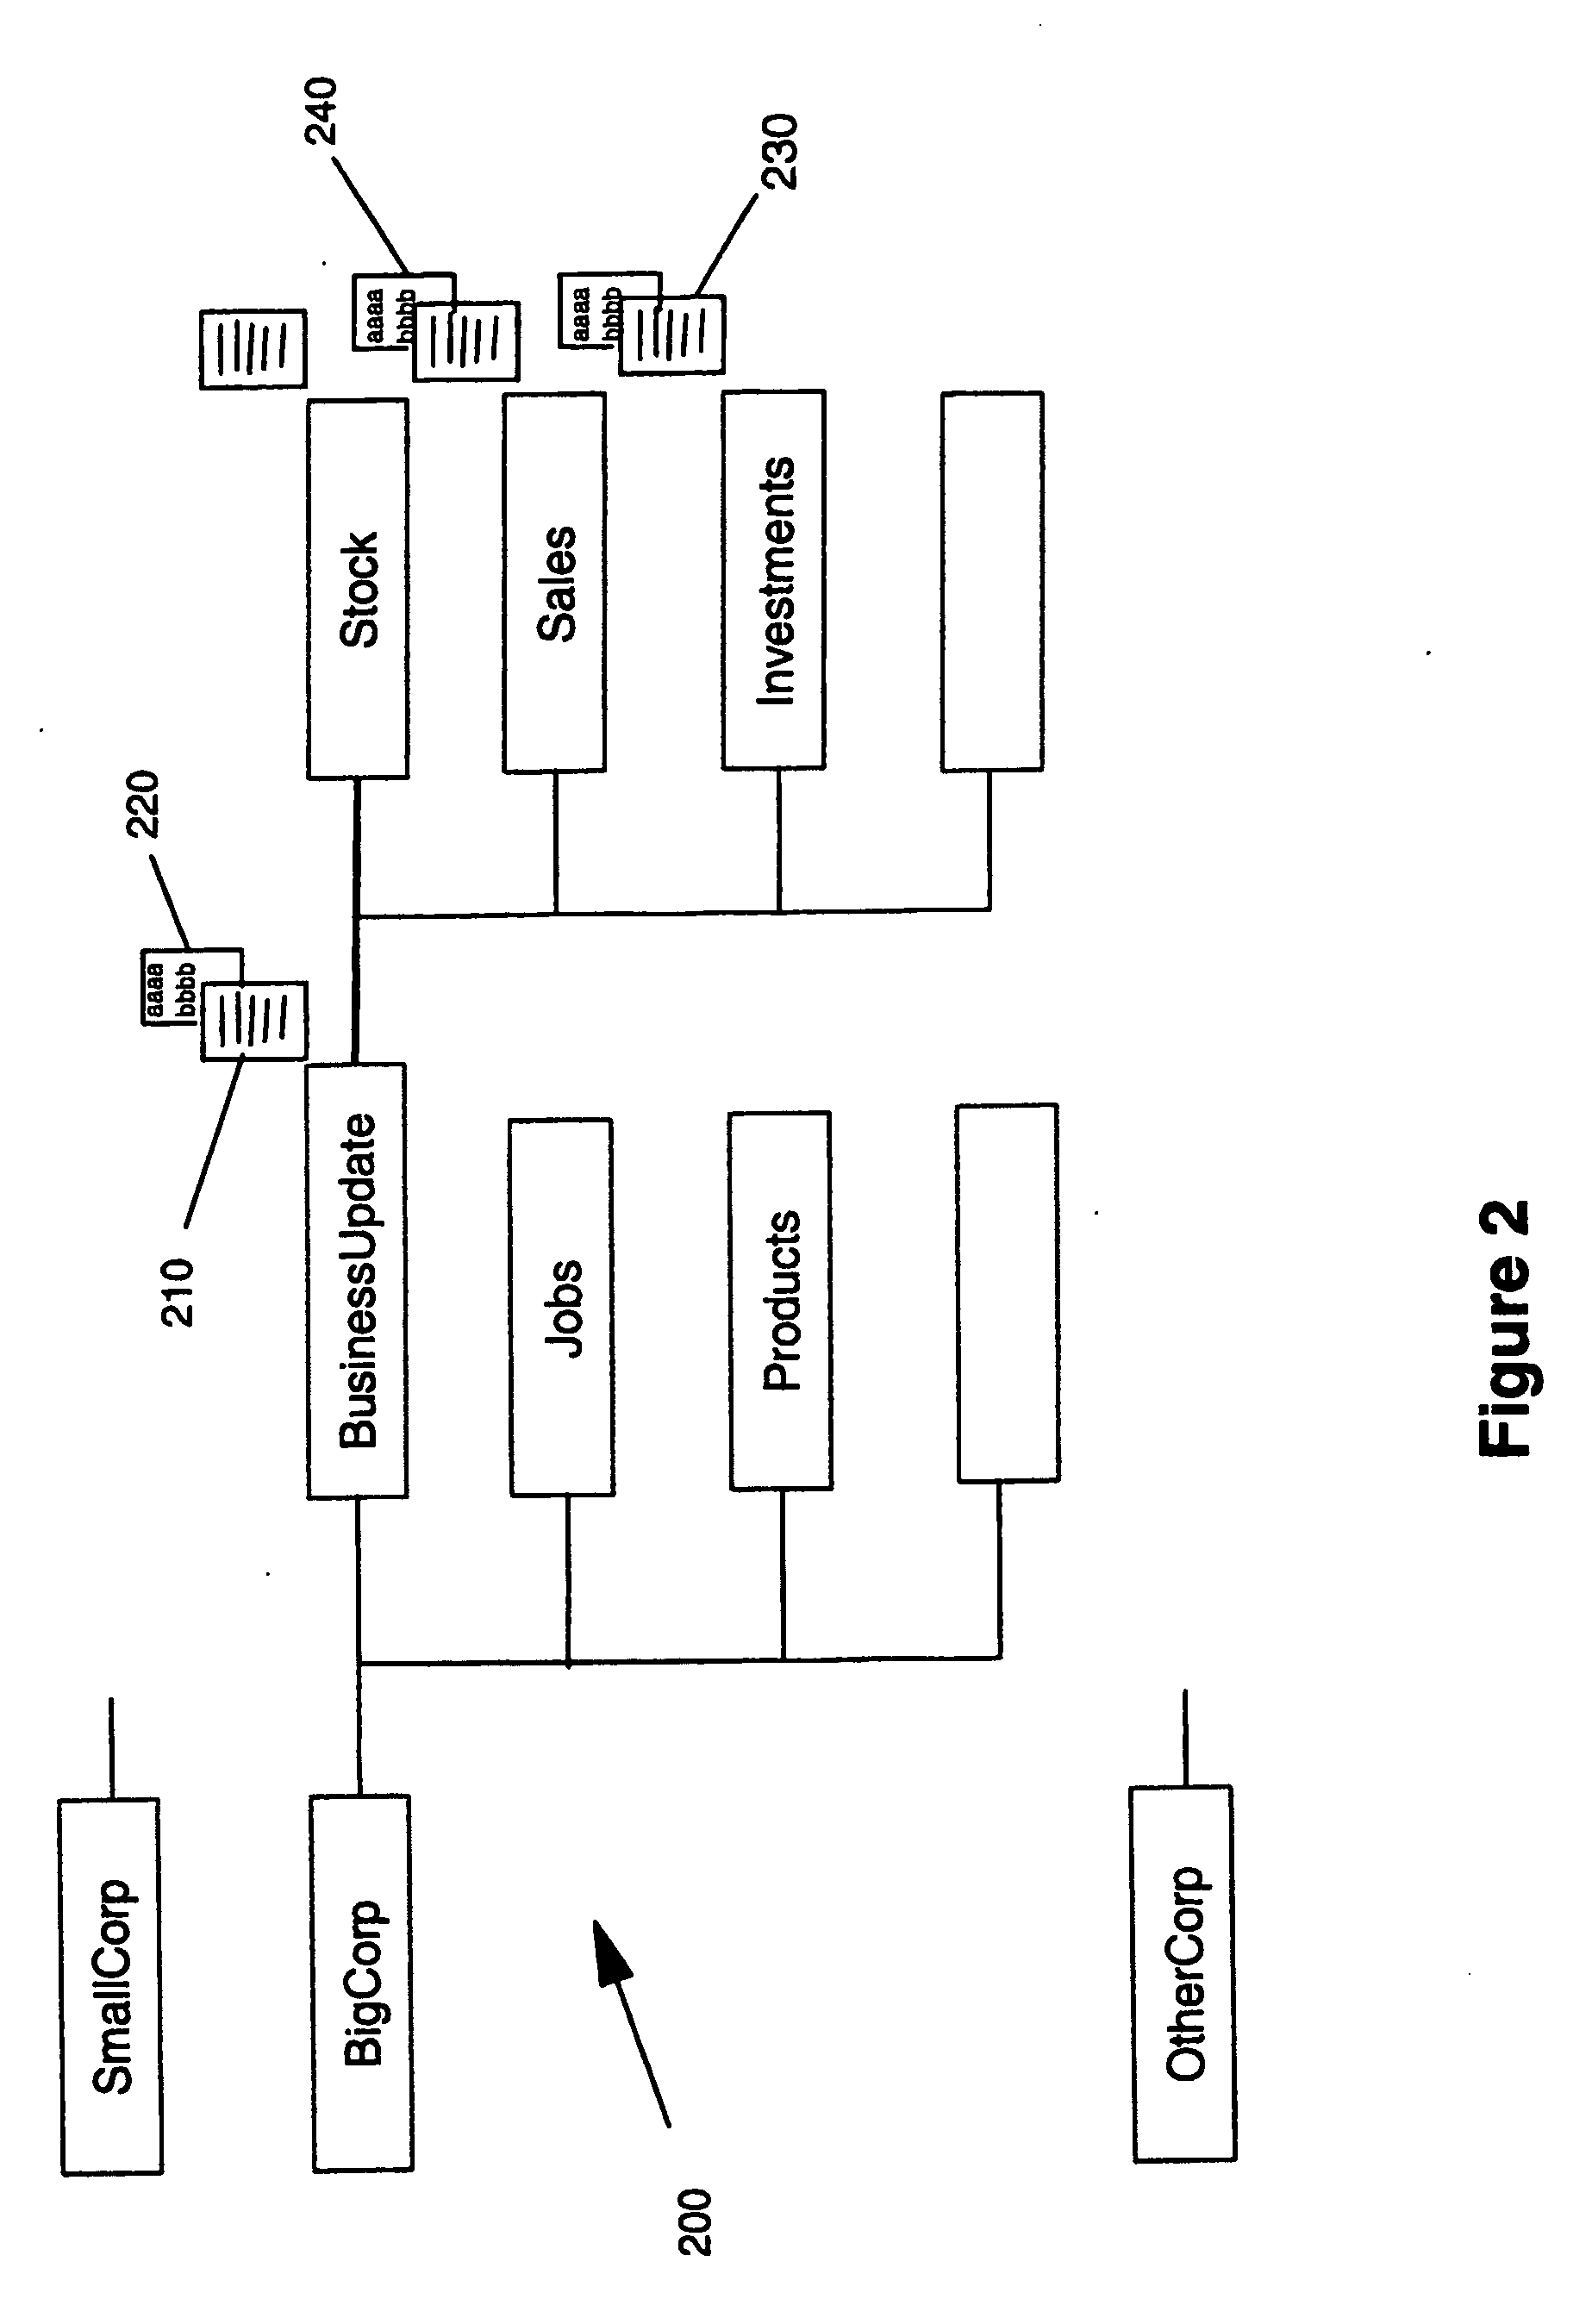 Methods, apparatus and computer programs for processing alerts and auditing in a publish/subscribe system